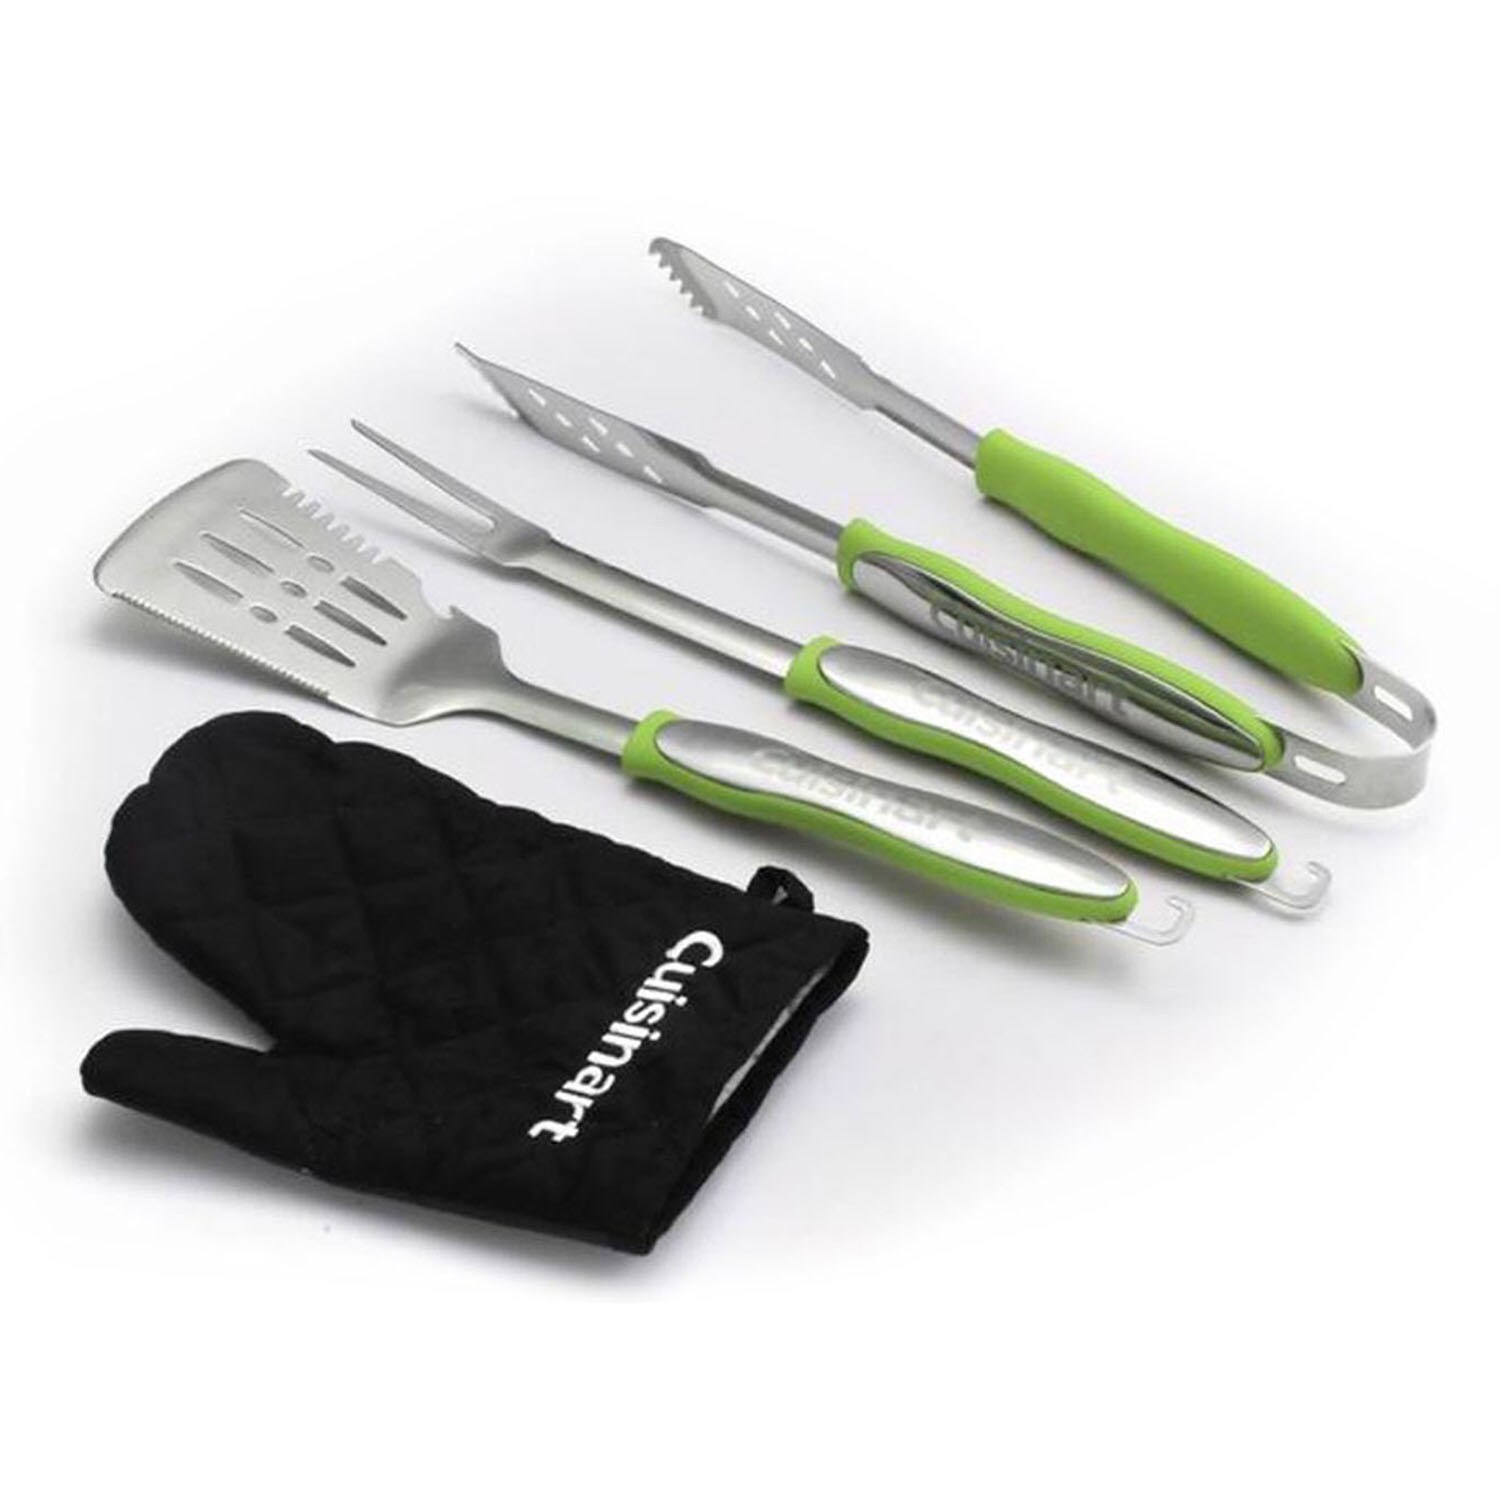 Cuisinart CGS-134 3-Piece Grilling Tool Set with Grill Glove - image 2 of 2